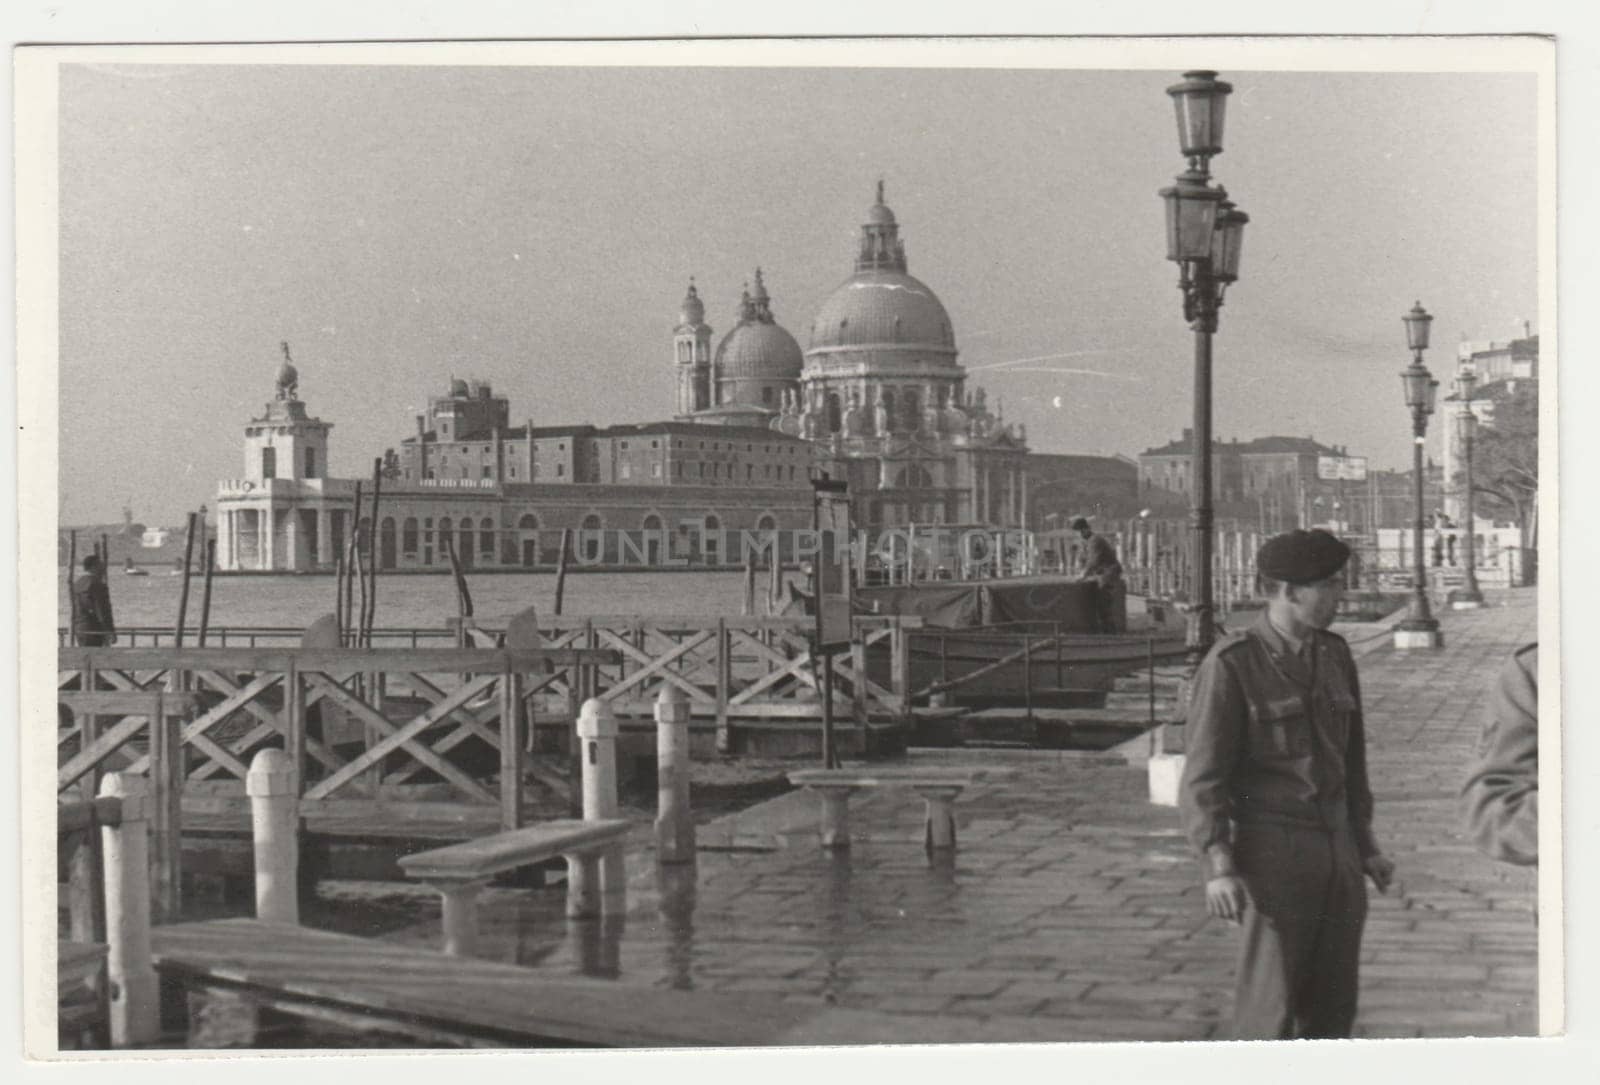 Vintage photo shows the Italian town - Venice. Retro black and white photography. Circa 1970s. by roman_nerud